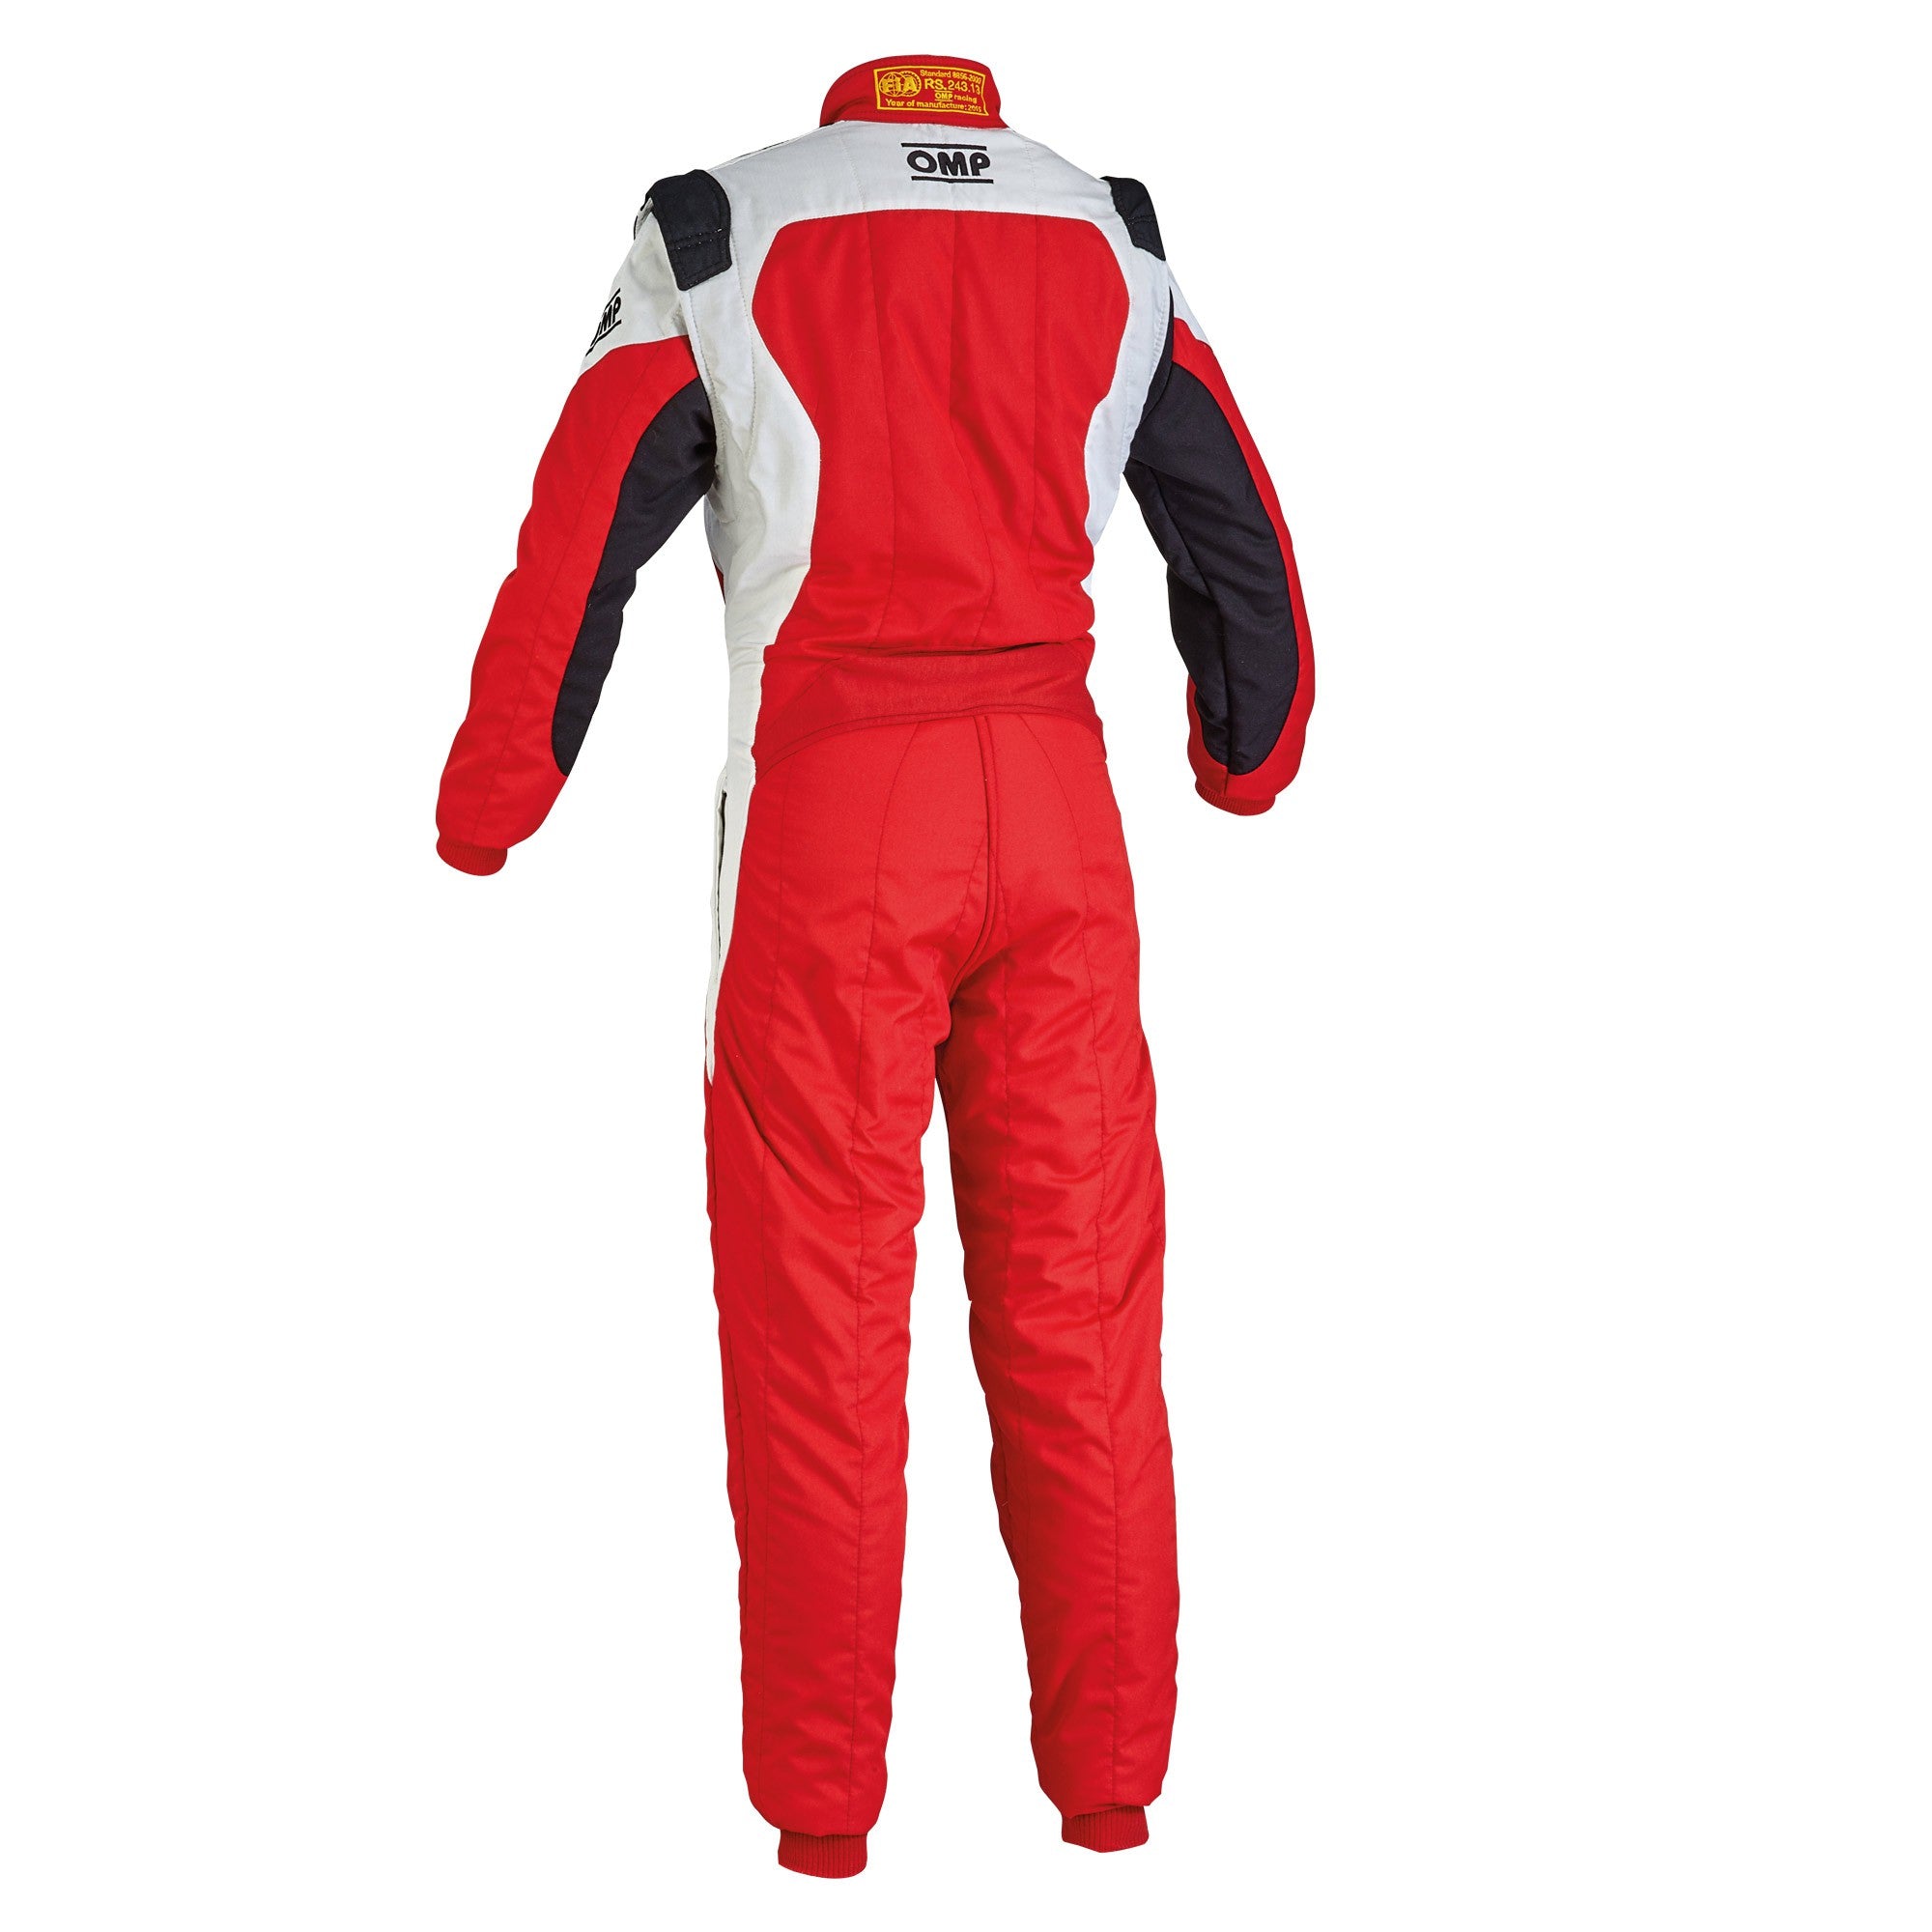 OMP IA0-1854-B01-063-42 FIRST EVO Racing suit, FIA, red/white, size 42 Photo-1 